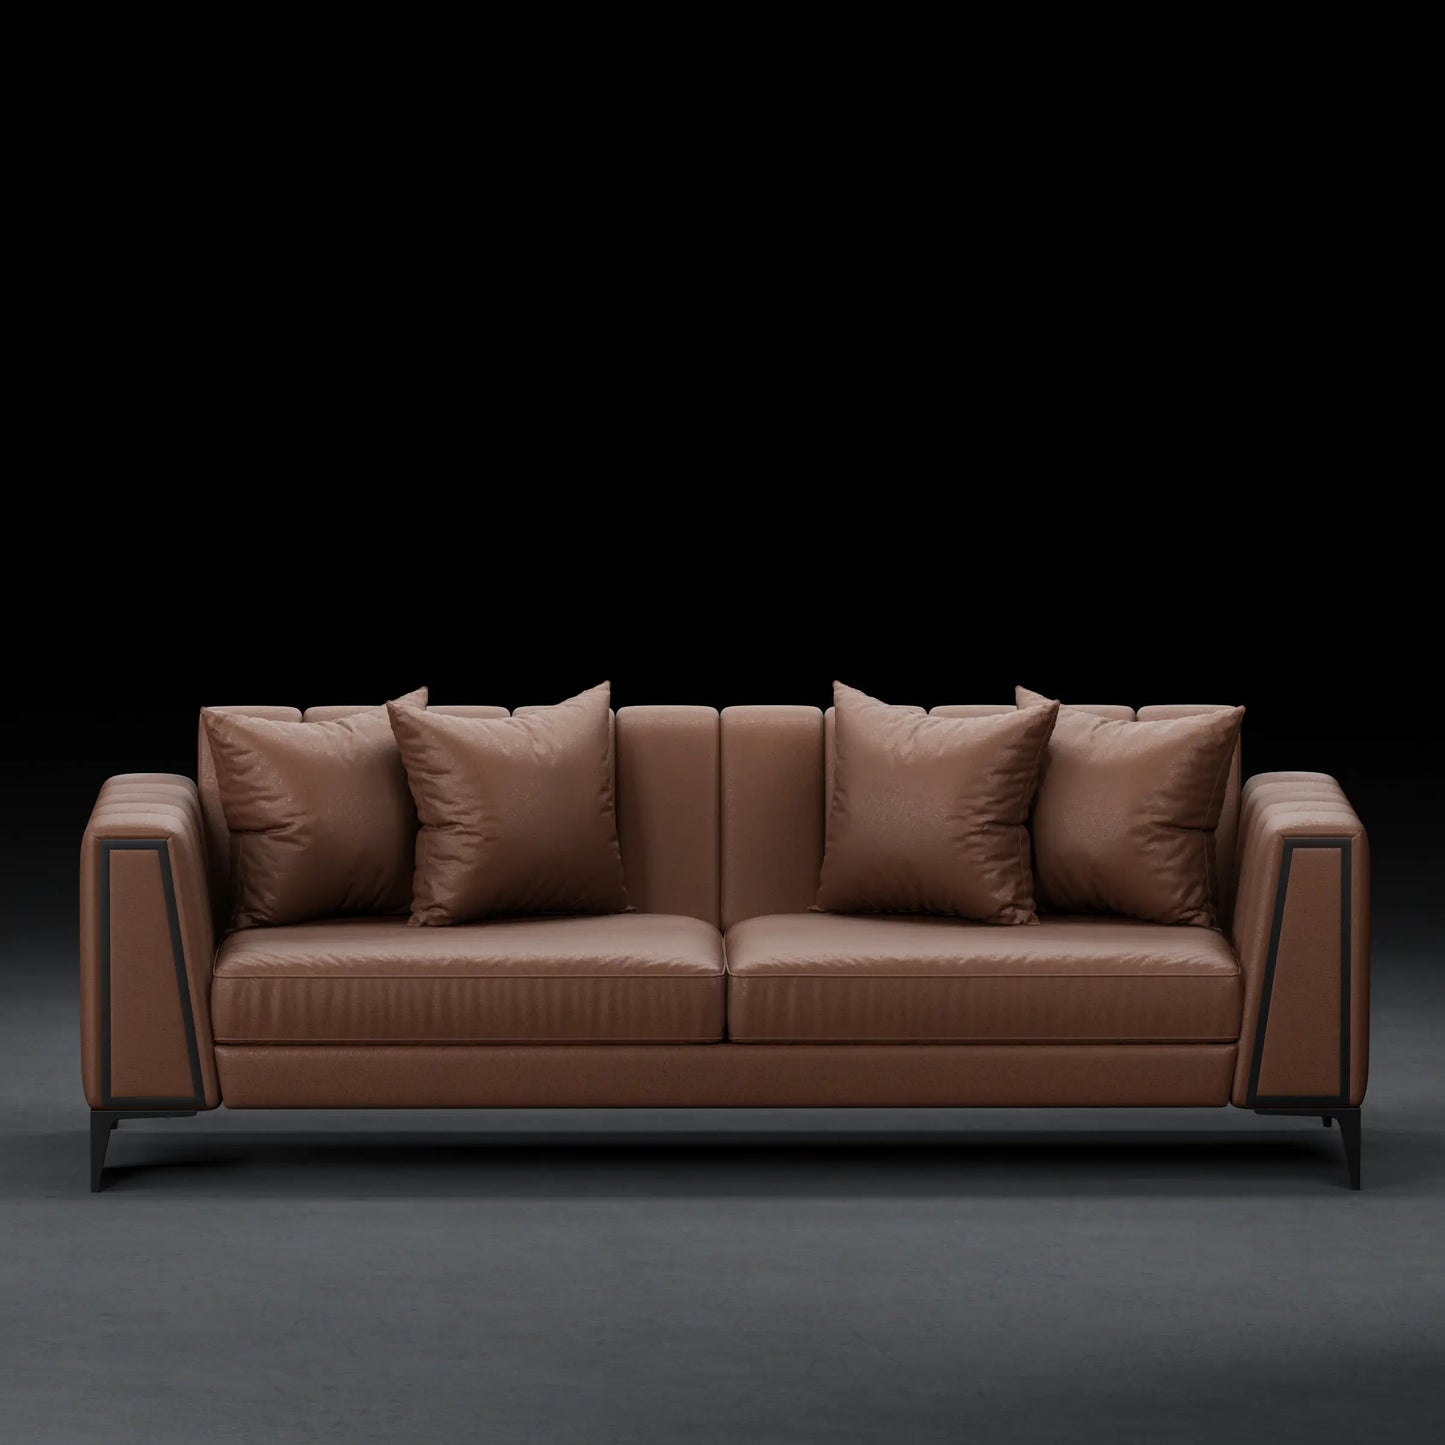 Grape - Contemporary 4 Seater Couch in Leather Finish | Brown Color